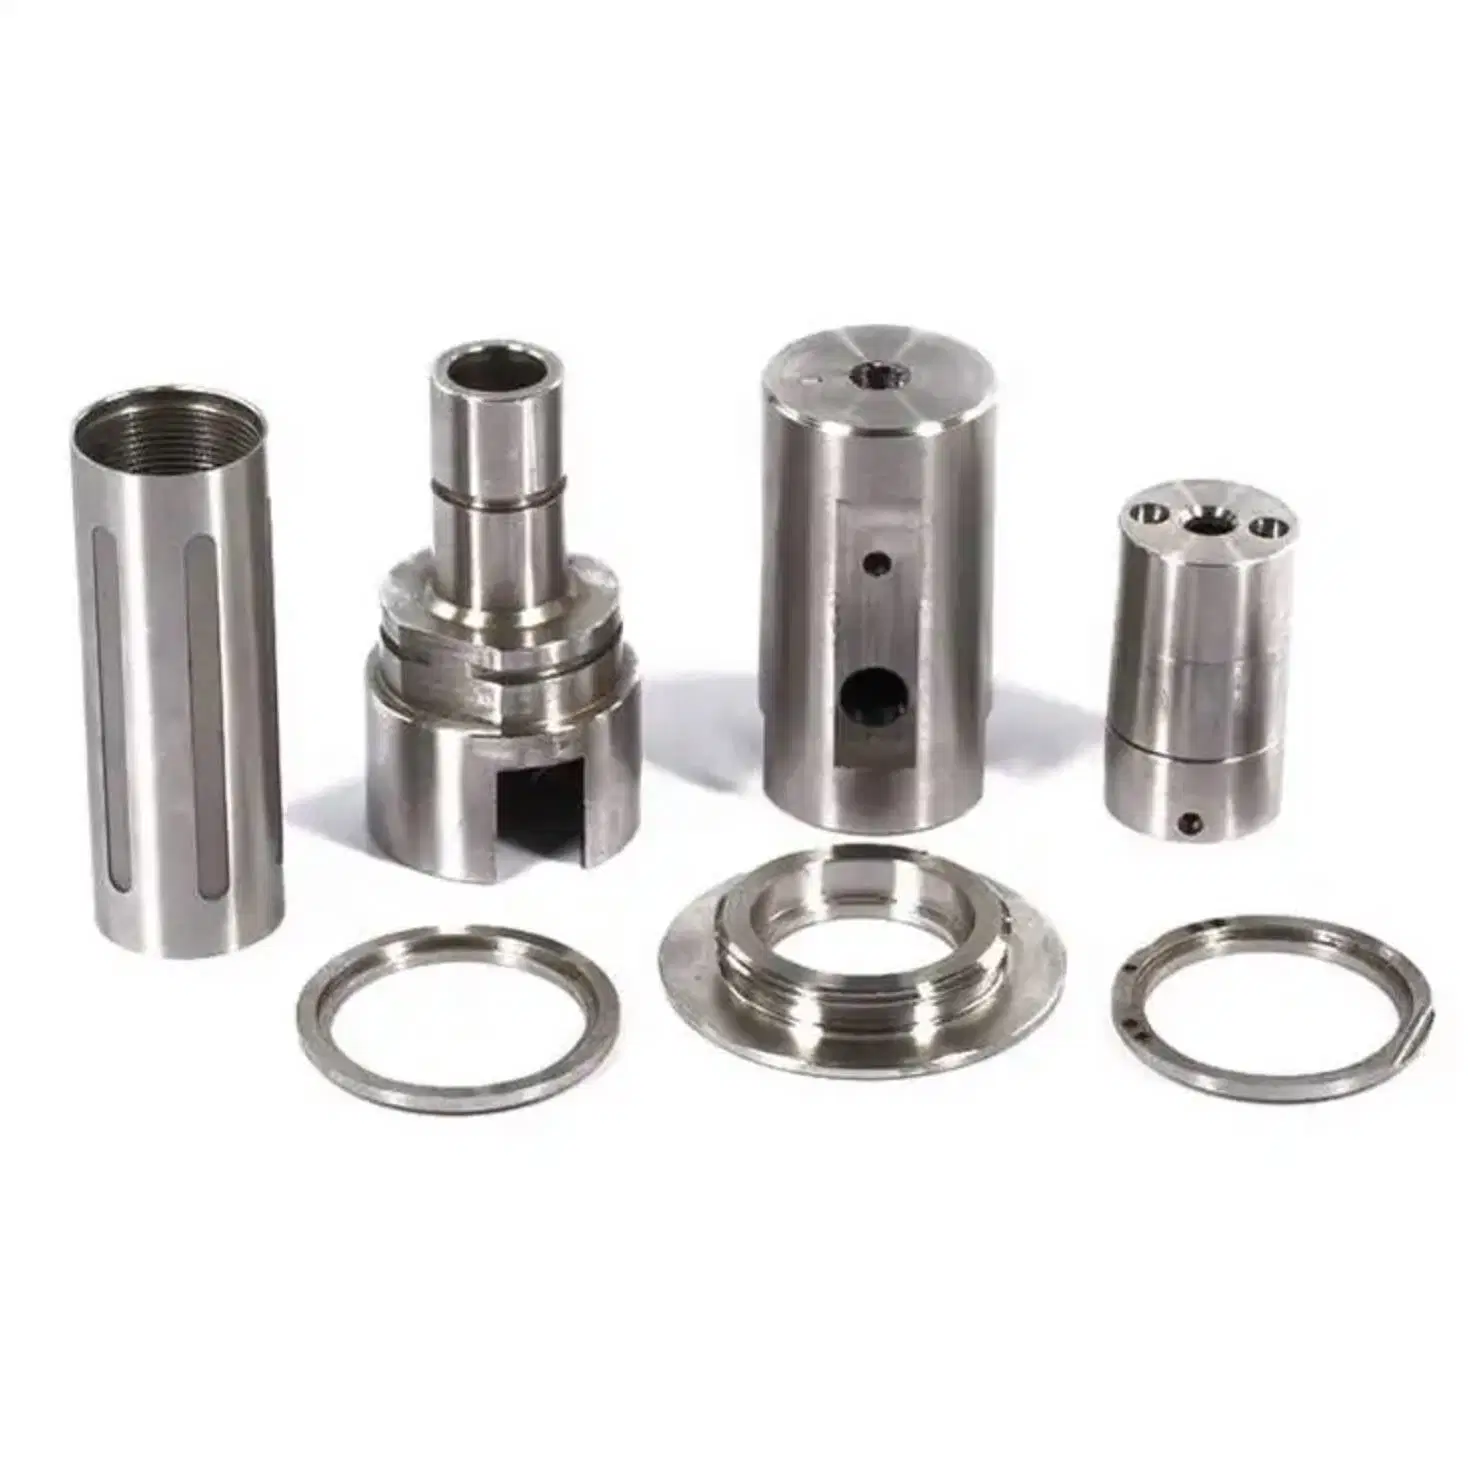 CNC Machining Stainless Steel Aluminum Alloy Irone-Bike Motorcycle Bicycle Gearbox Spline Precision Motor Parts